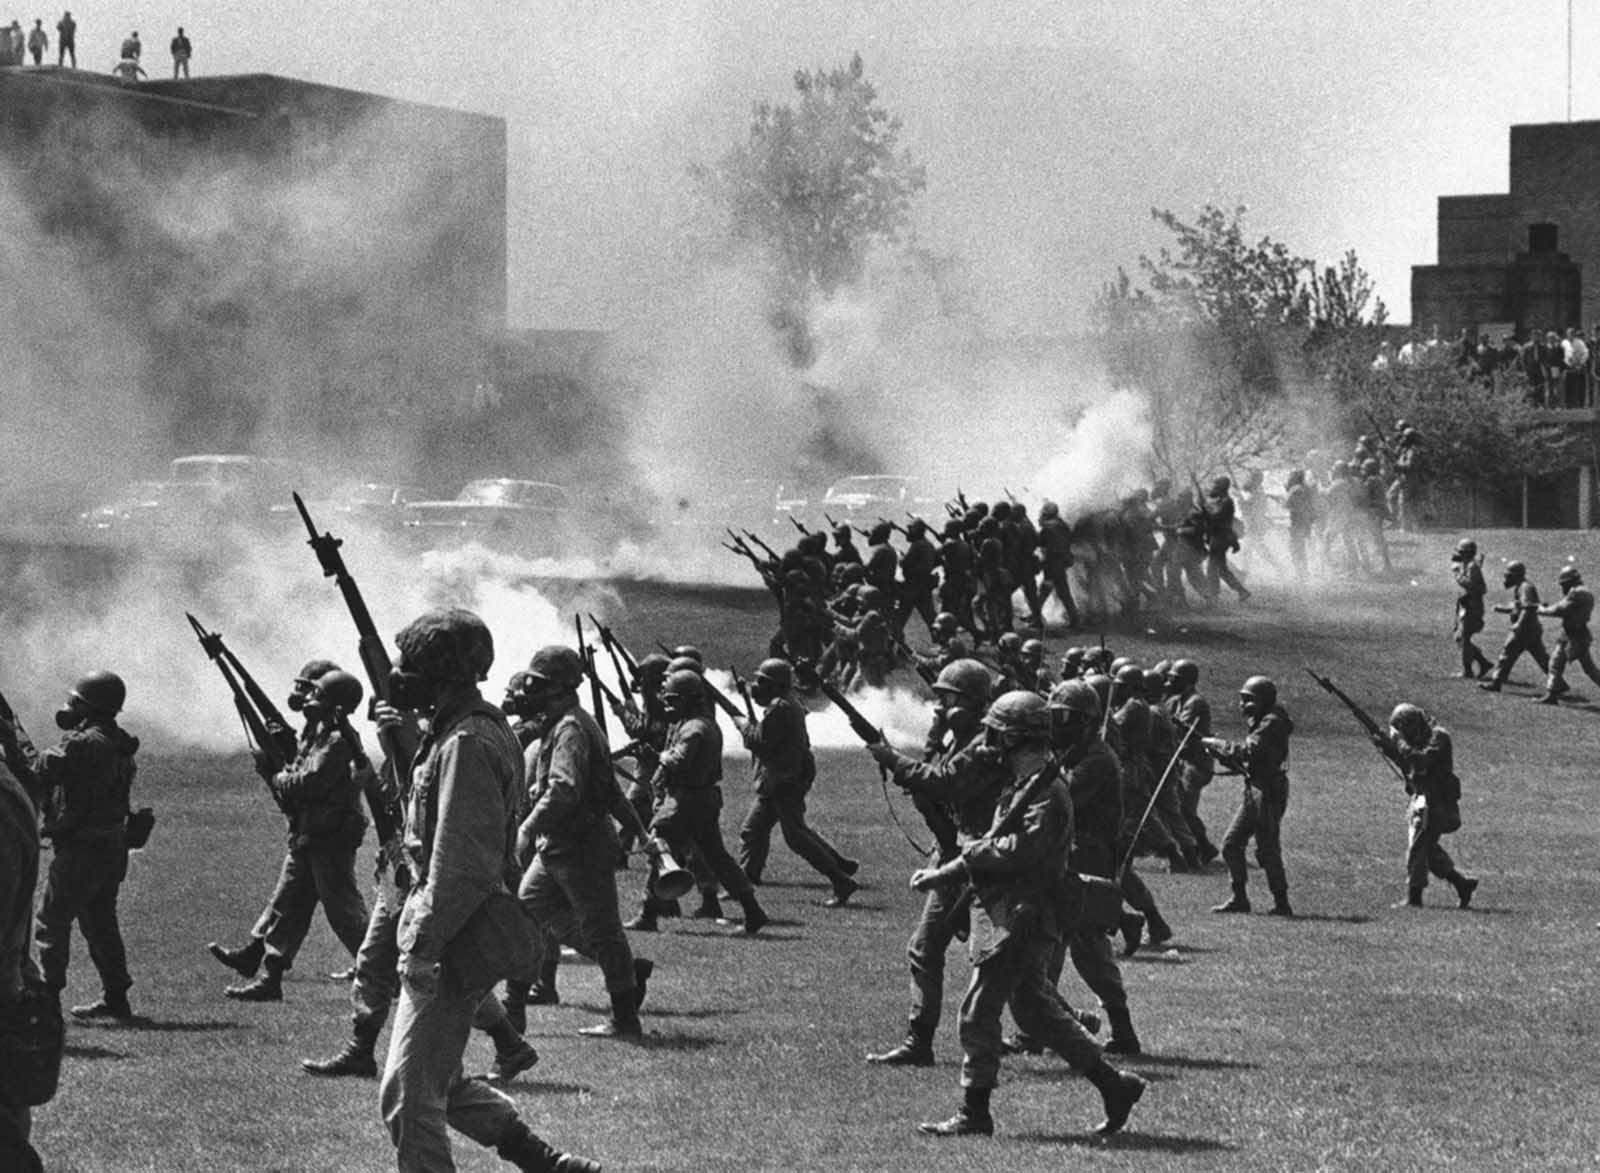 The Ohio National Guard moves in on rioting students at Kent State University in Kent, Ohio, on May 4, 1970. Four persons were killed and eleven wounded when National Guardsmen opened fire.